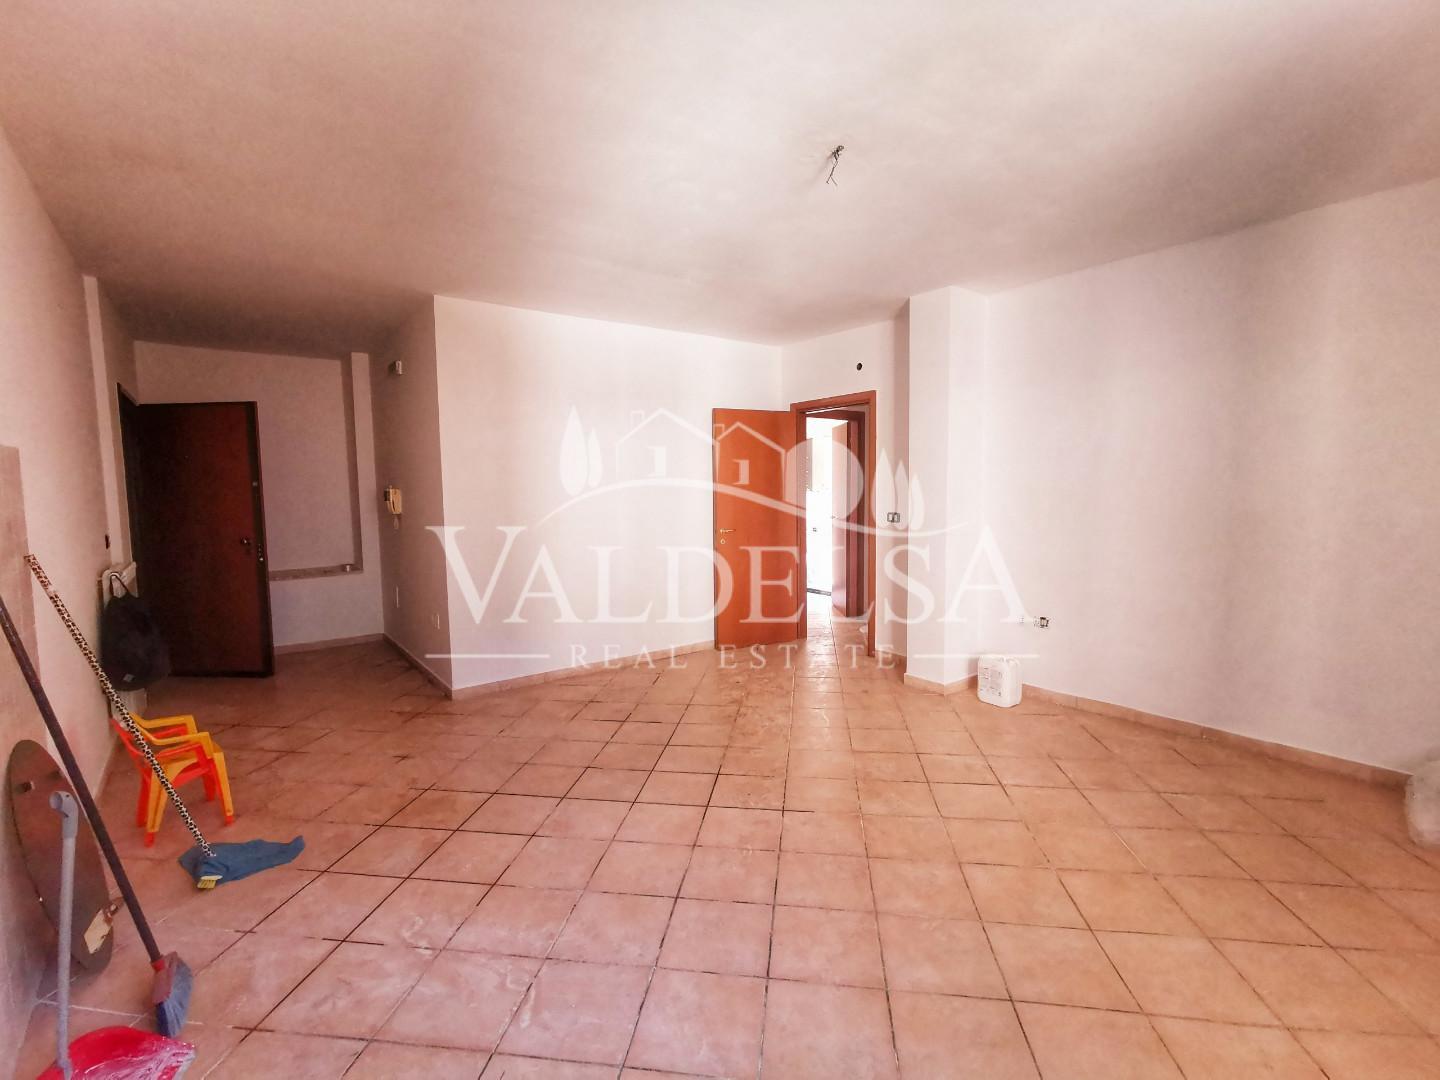 Apartment for sale, ref. 712